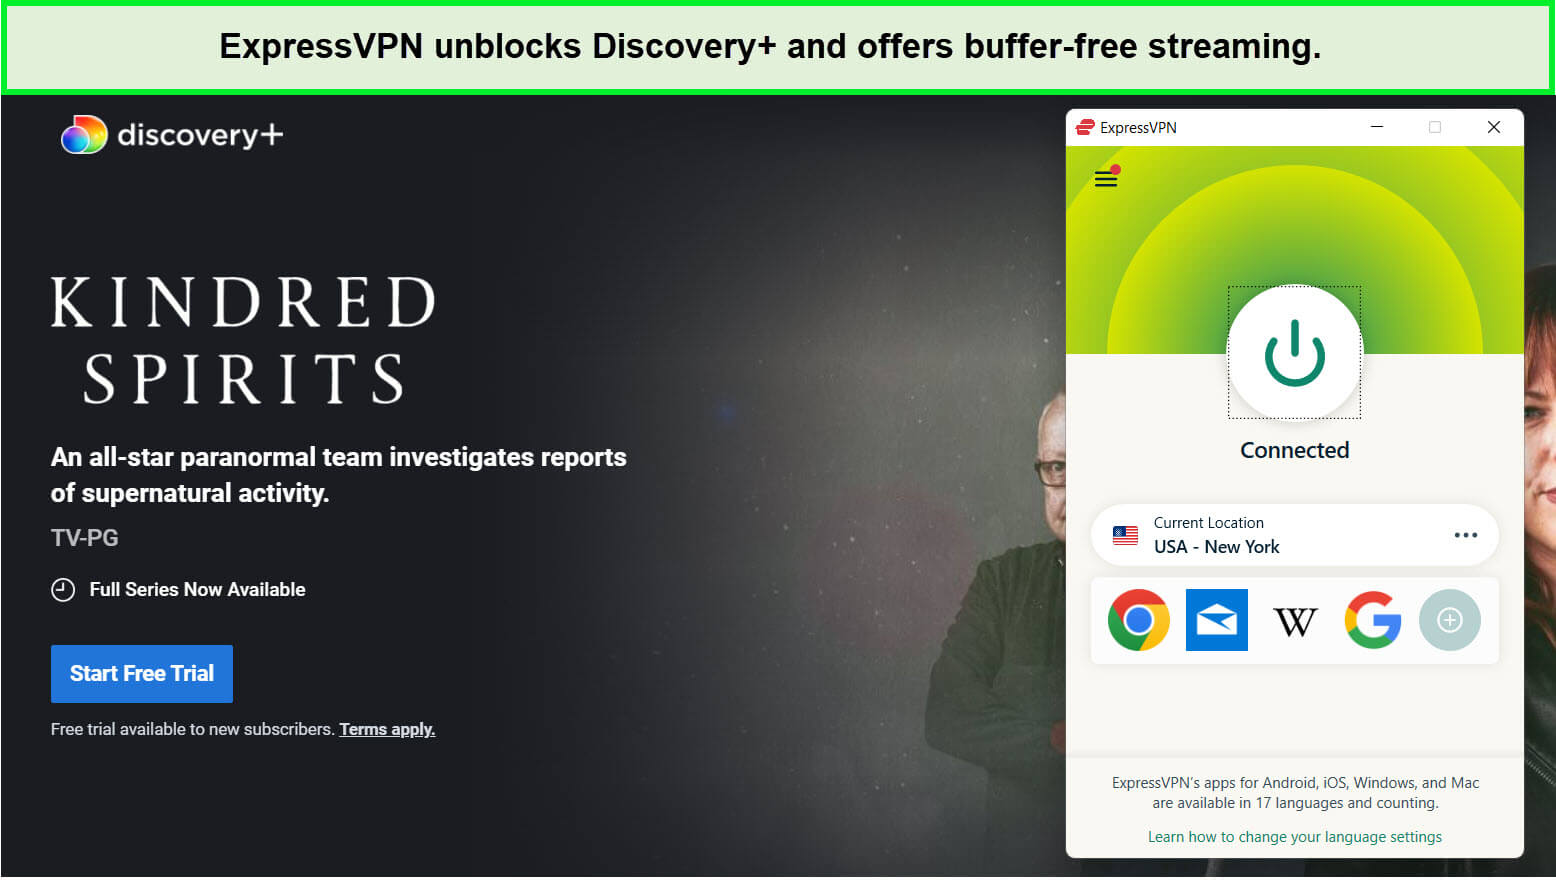 expressvpn-unblocks-kindred-spirits-s7-on-discovery-plus-in-aus